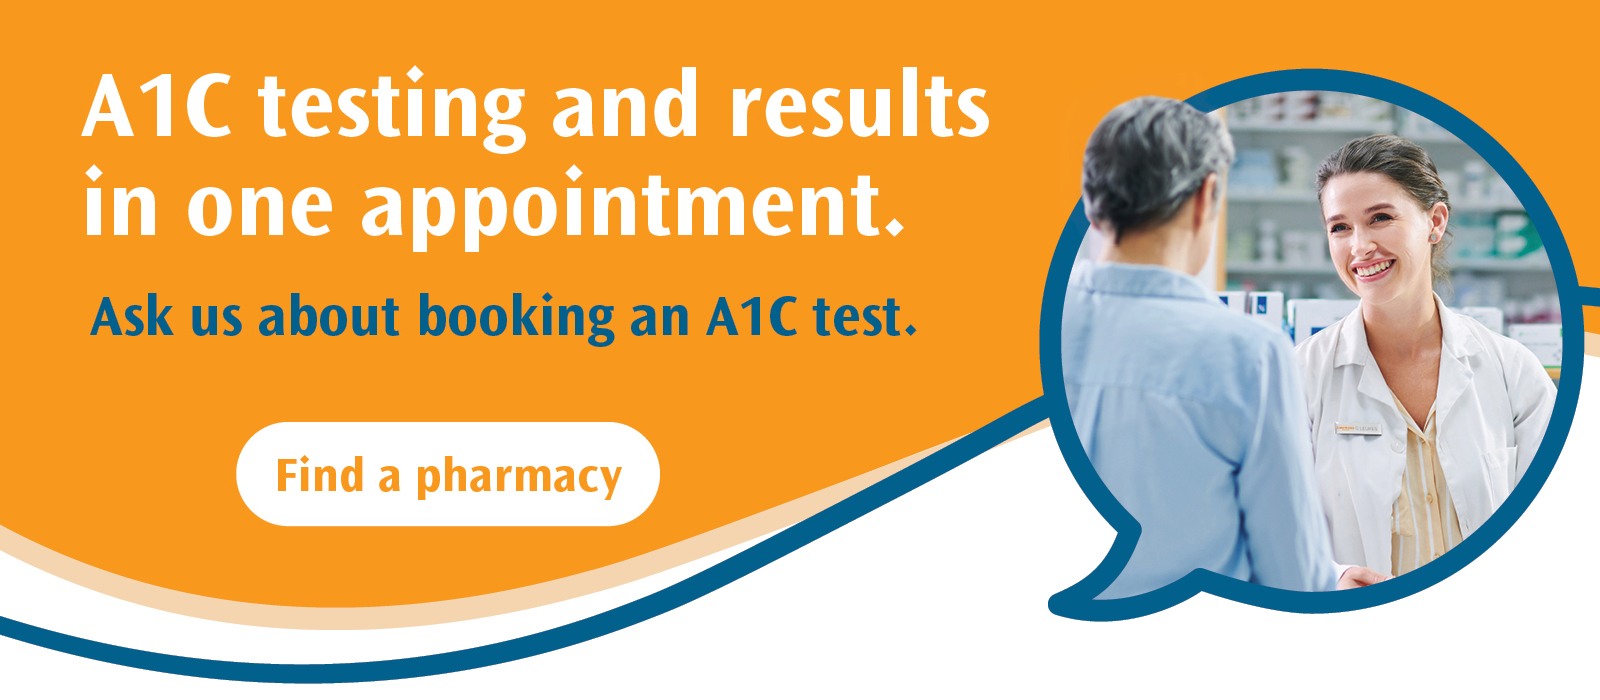 Text Reading 'A1C testing and results in one appointment. Ask us about booking an A1C test. Along with a 'Find a pharmacy' button given below.'